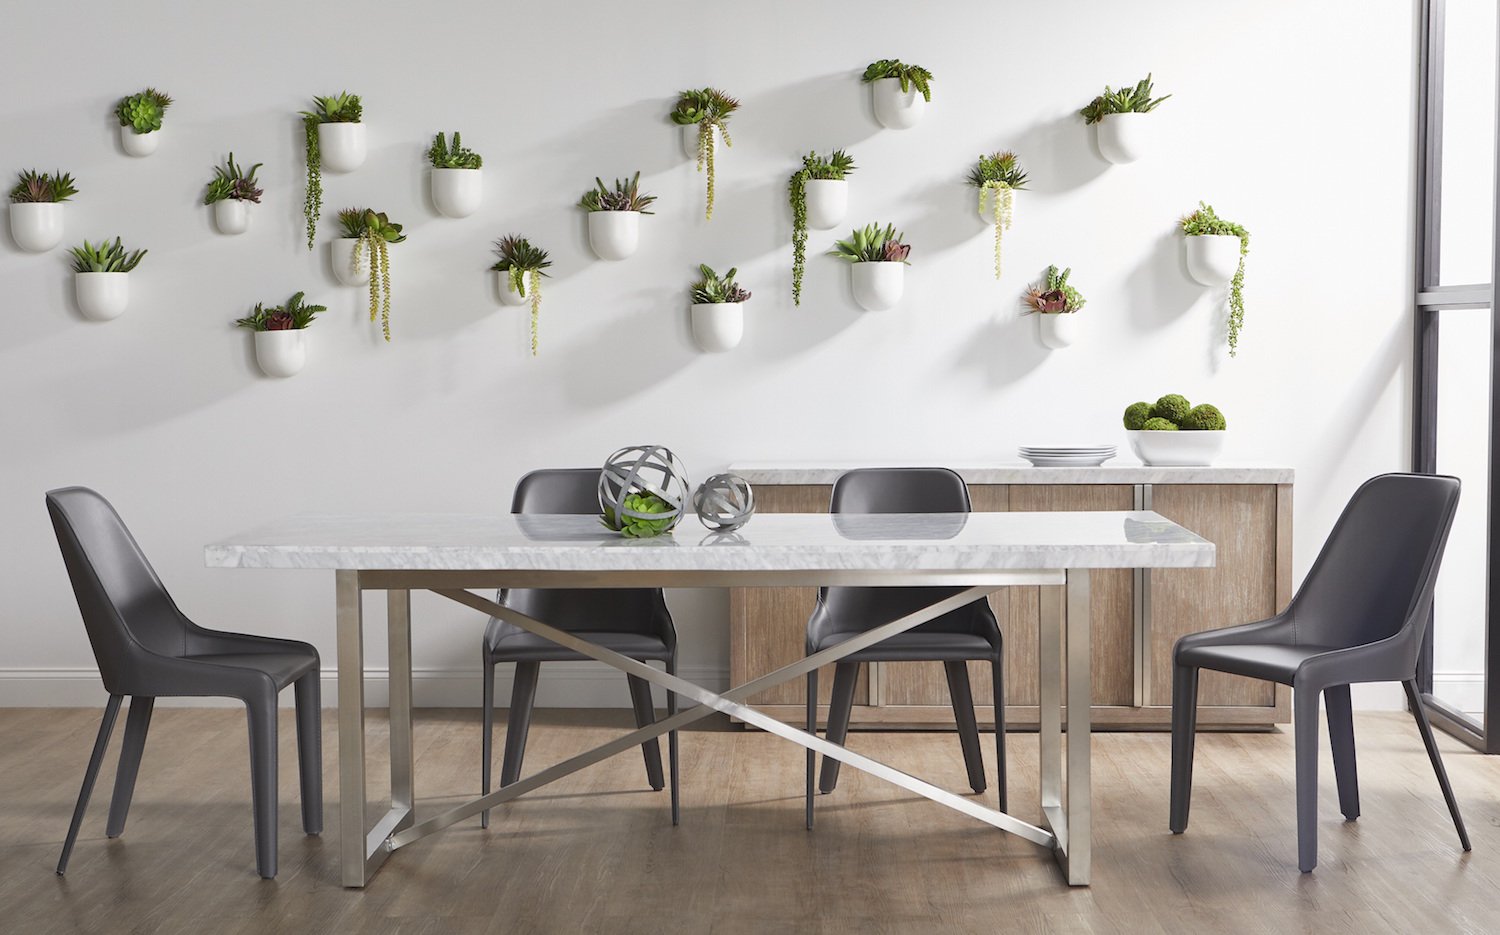 Growing Off the Walls: Five Tips for A Dynamic Living Wall